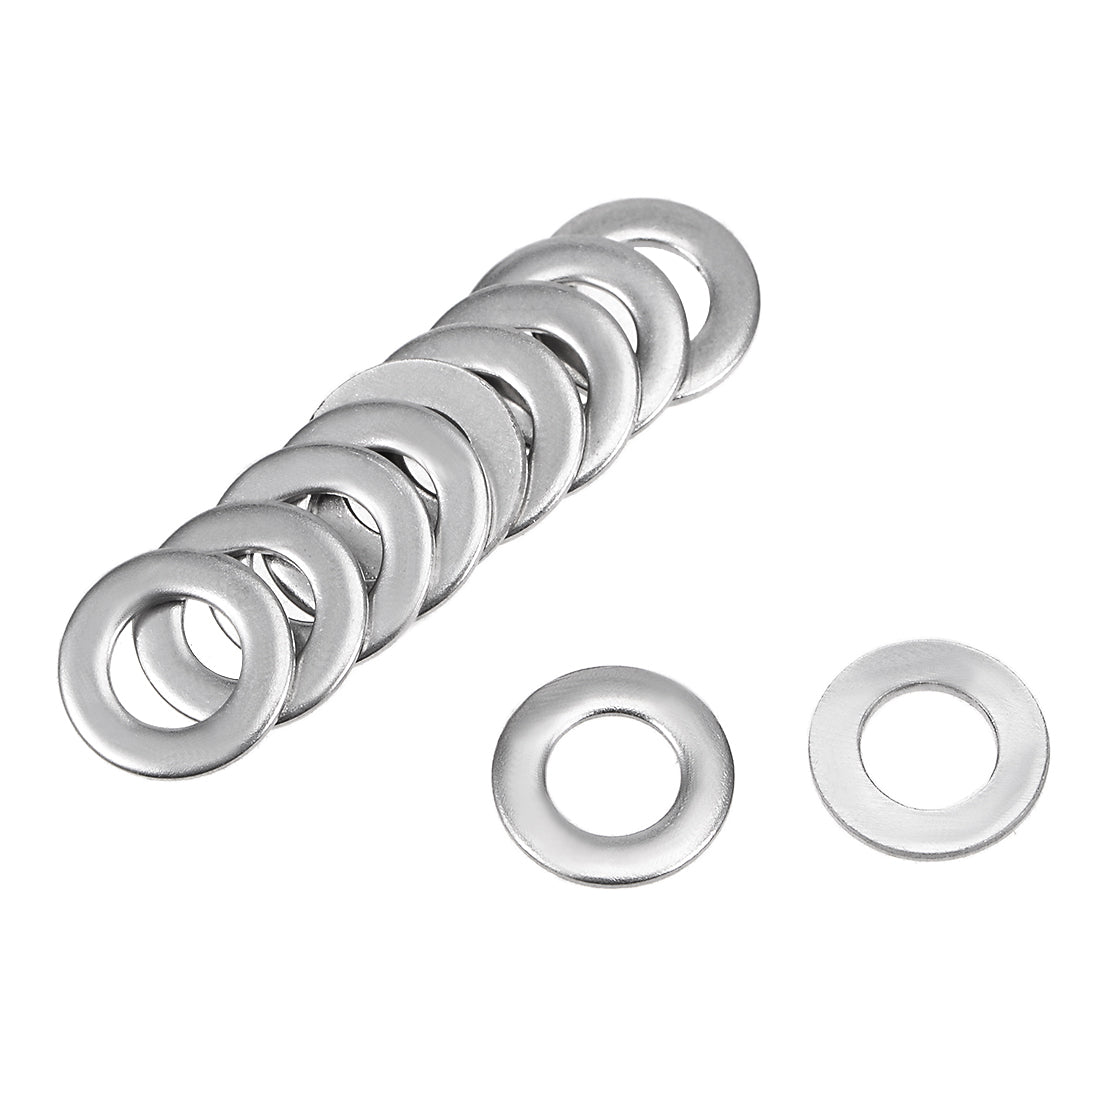 uxcell Uxcell 500Pcs 3mm x 6mm x 0.8mm 304 Stainless Steel Flat Washer for Screw Bolt